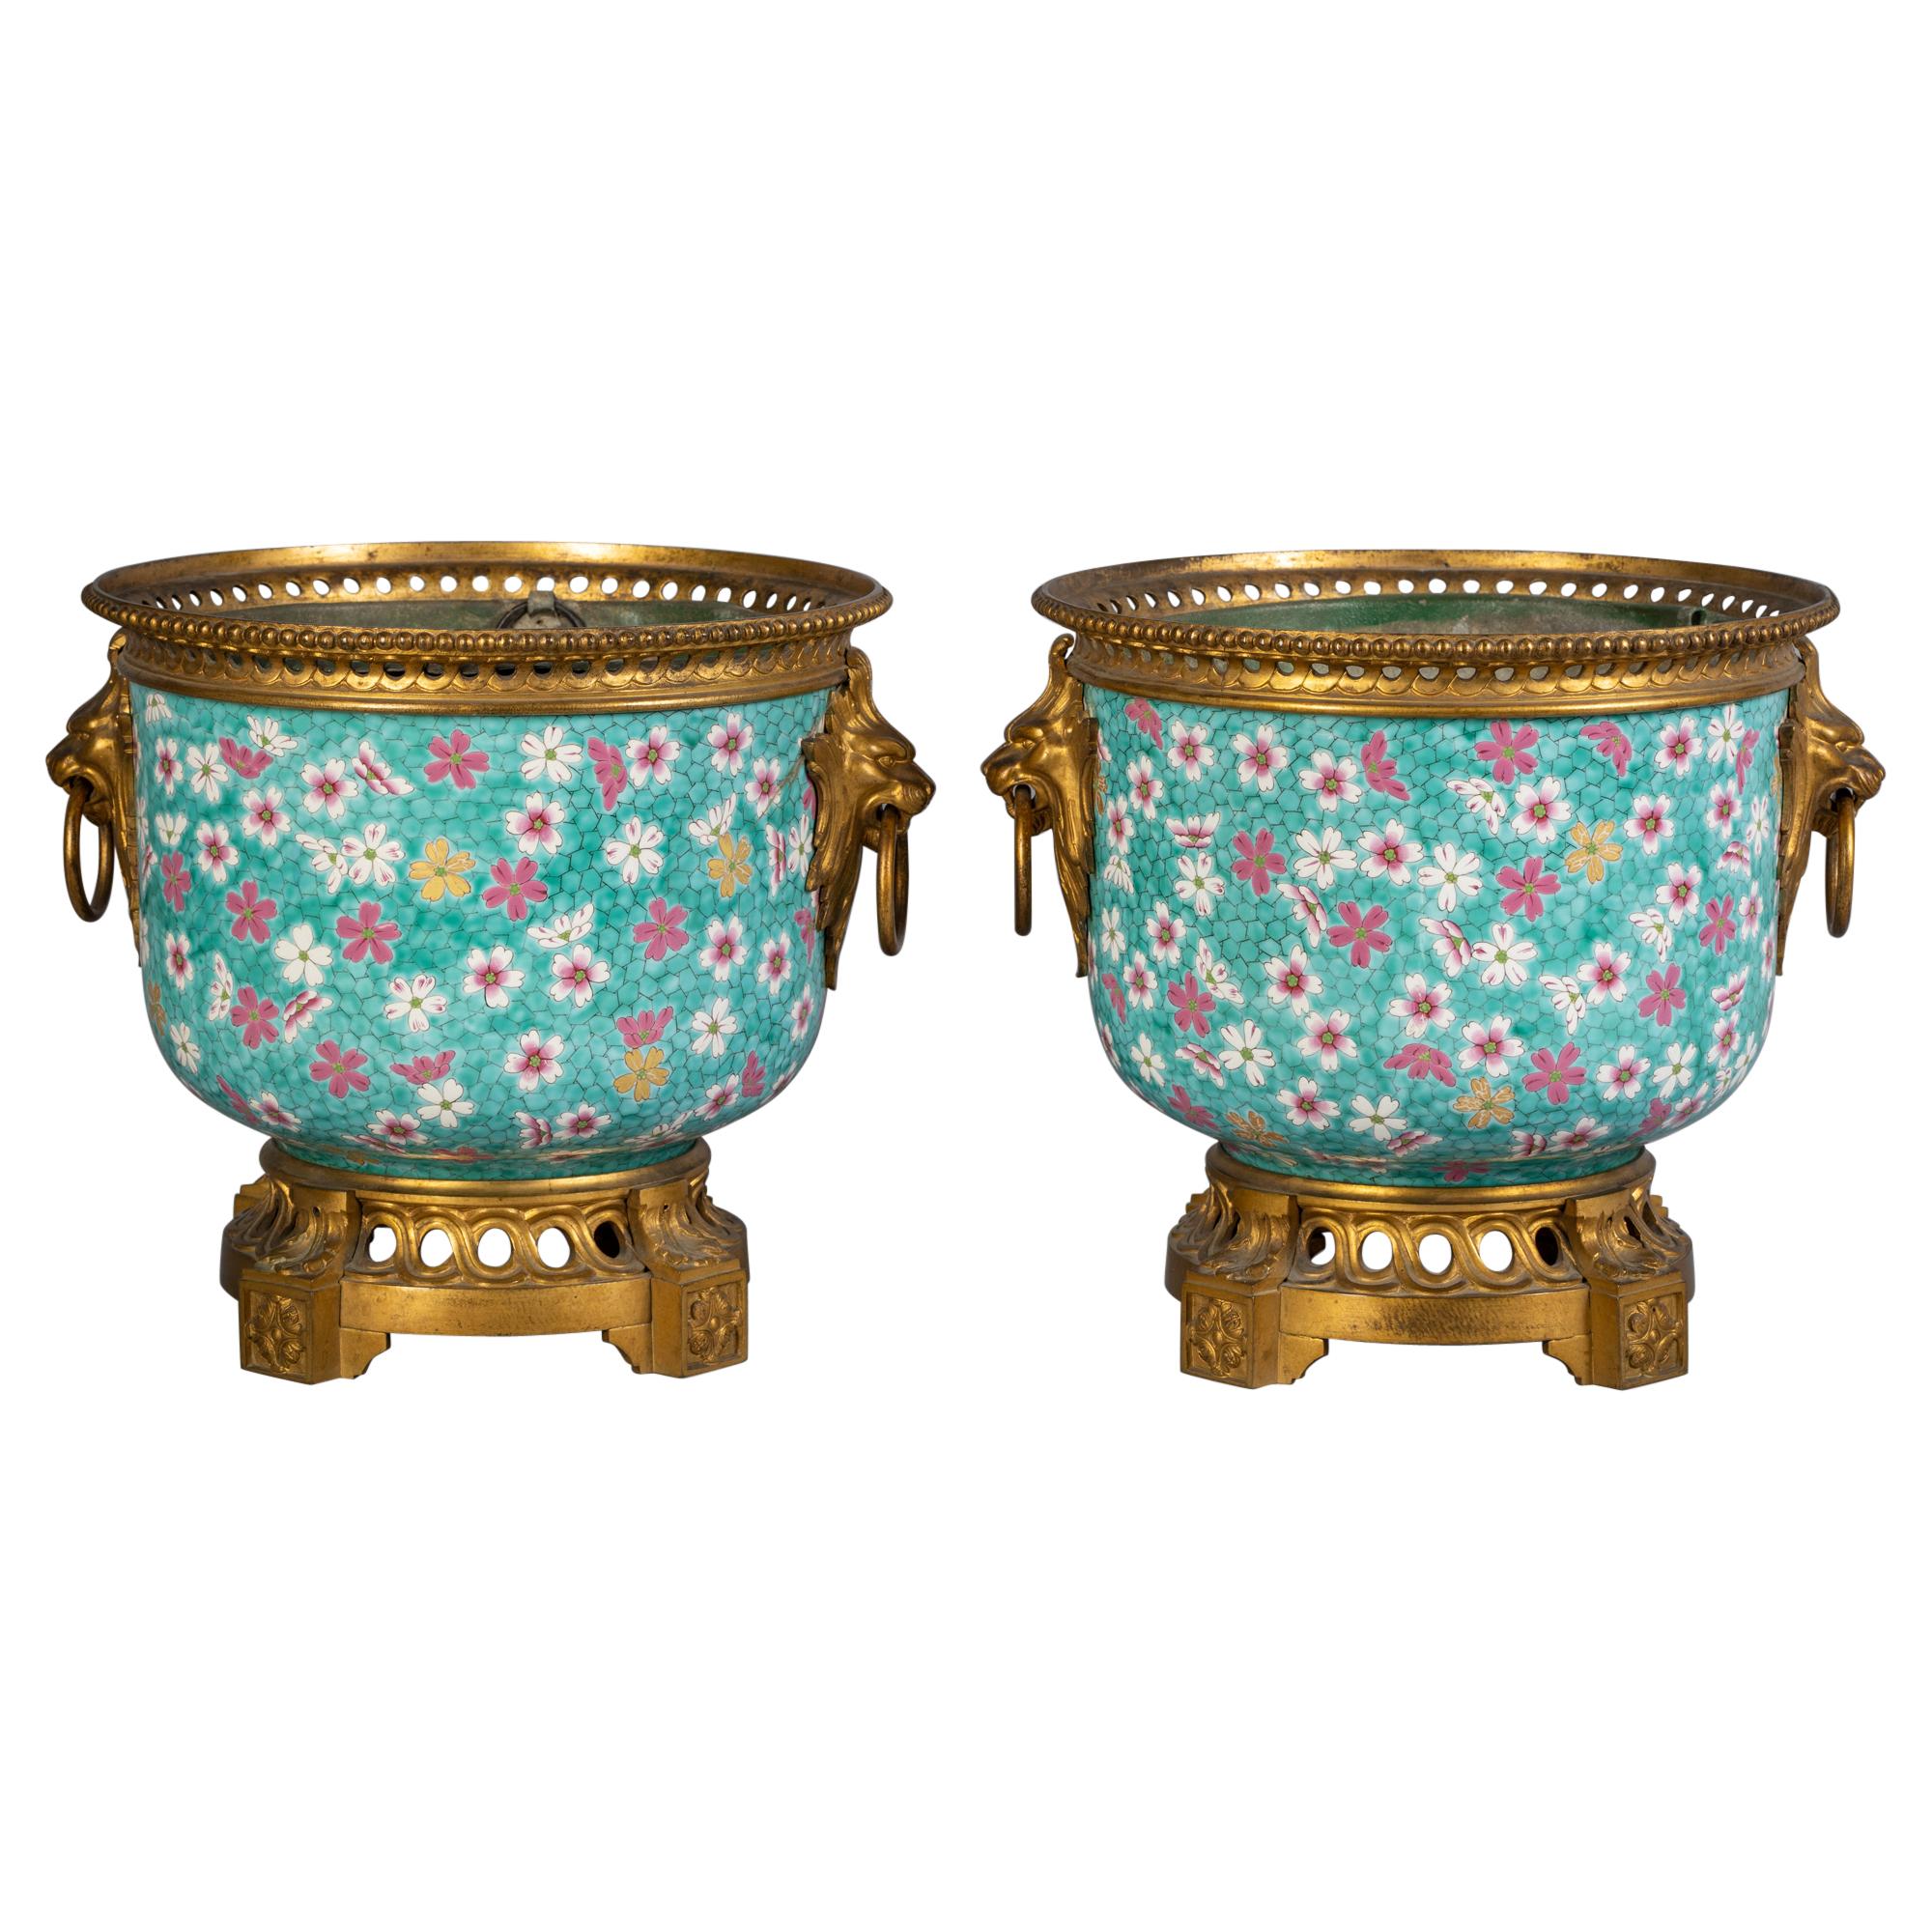 Pair of Gilt Bronze Mounted French Porcelain Jardinières, Late 19th Century For Sale